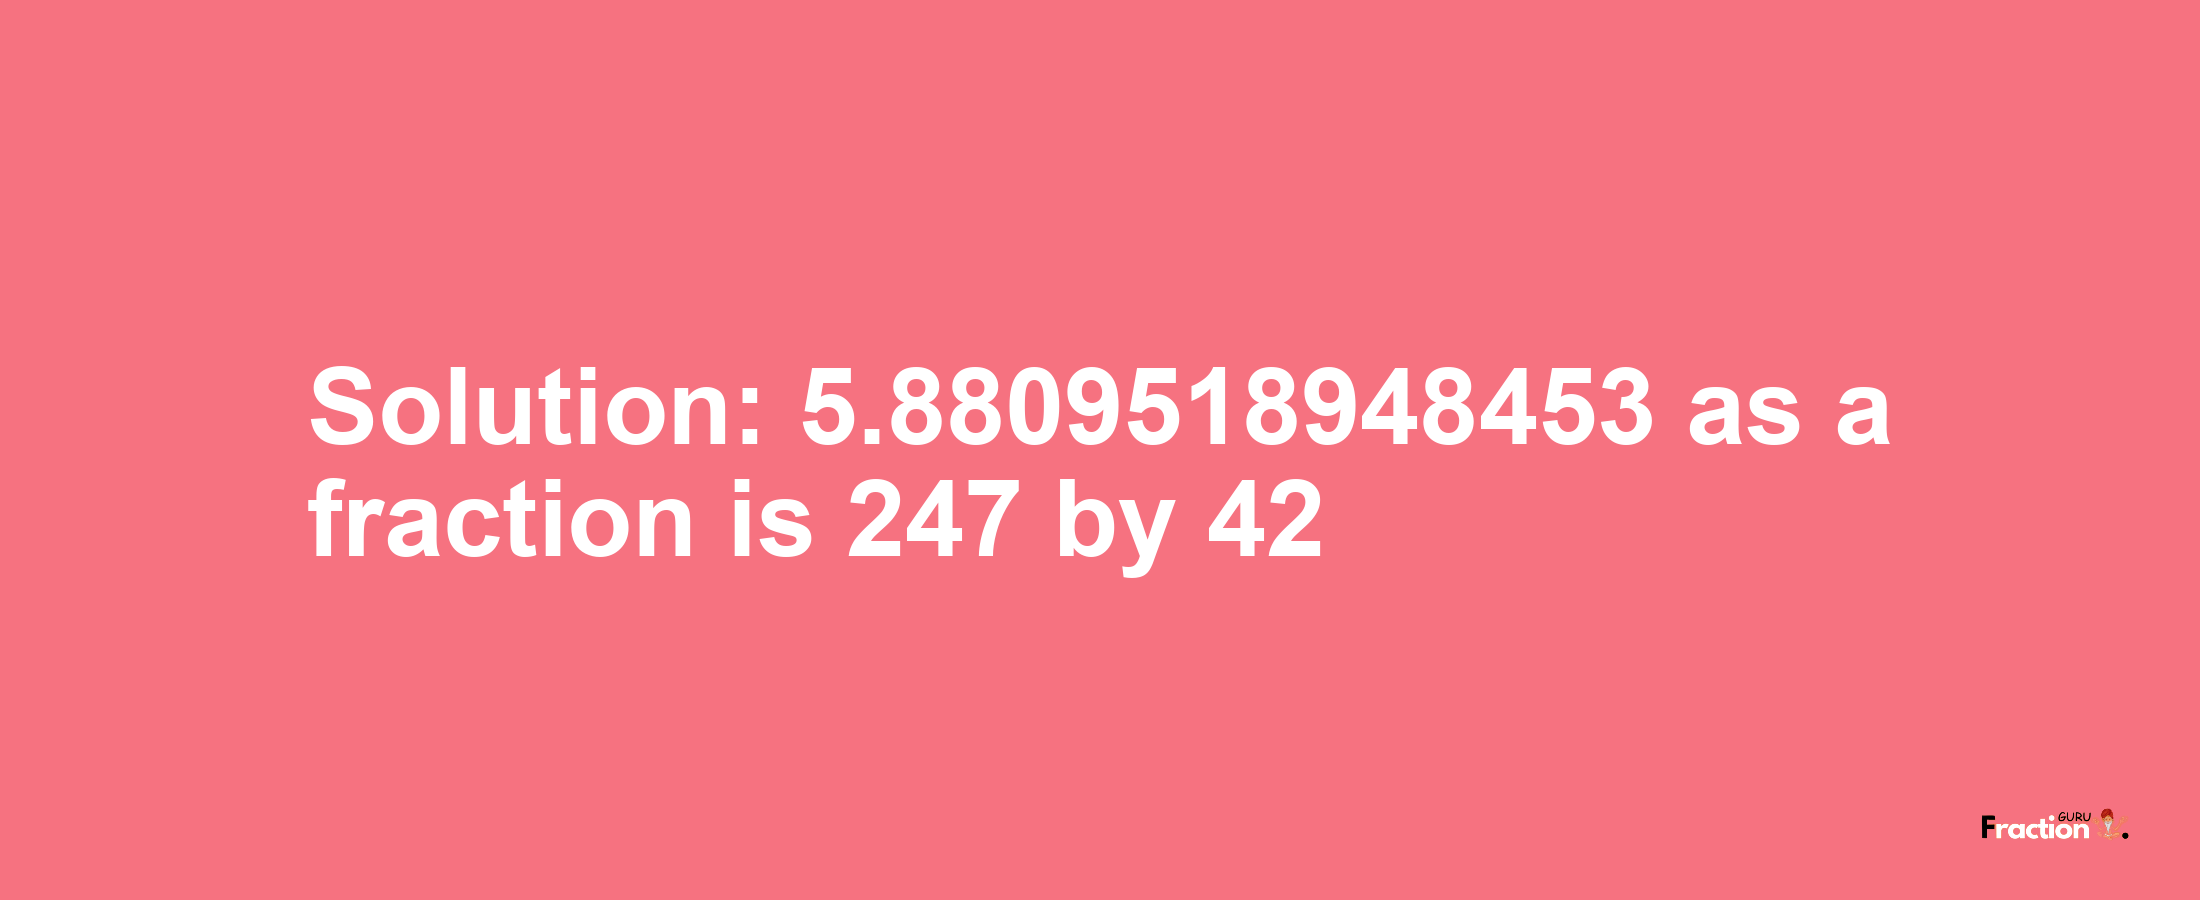 Solution:5.8809518948453 as a fraction is 247/42